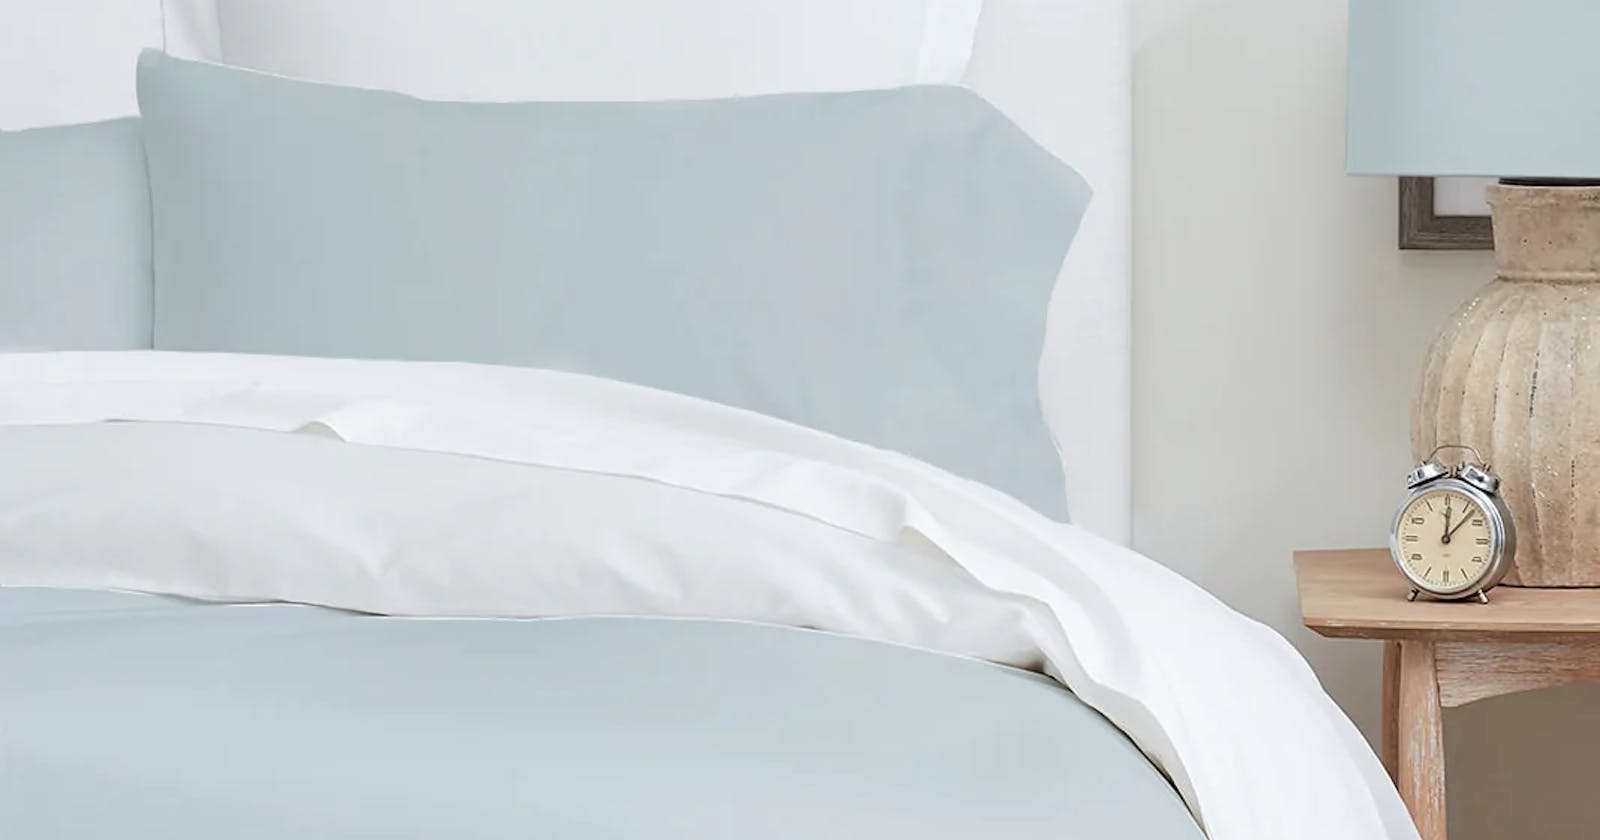 Why are cotton bed sheets so popular?